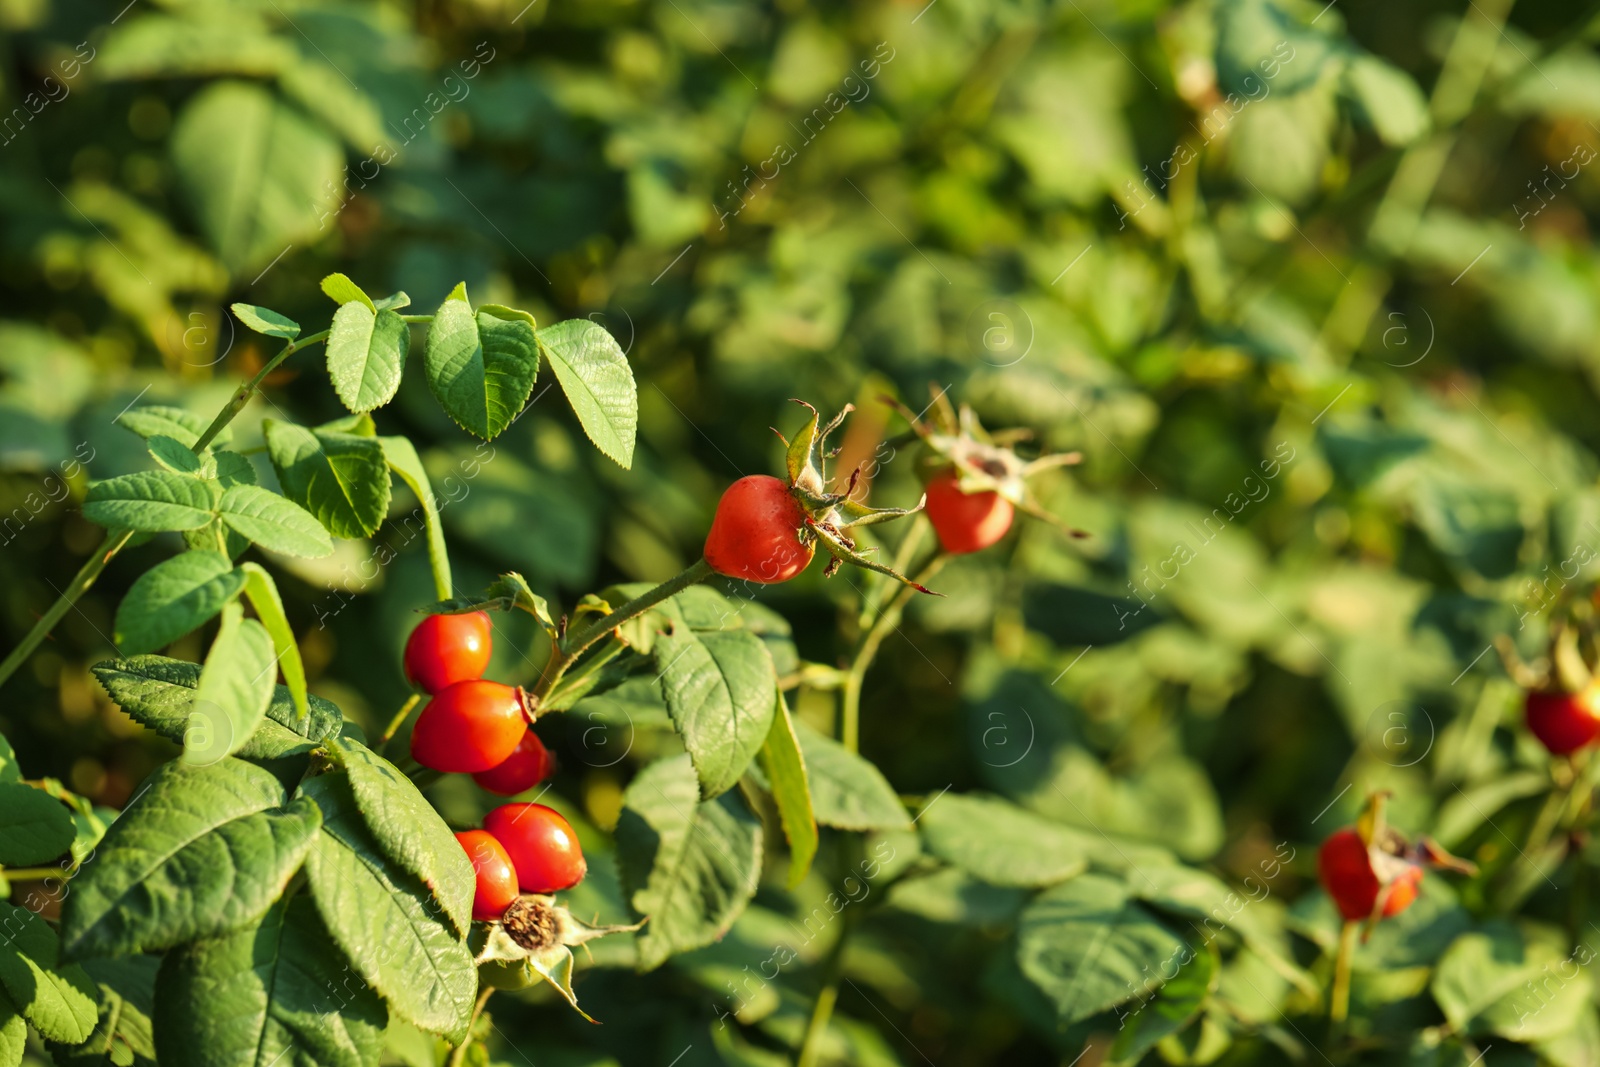 Photo of Rose hip bush with ripe red berries in garden